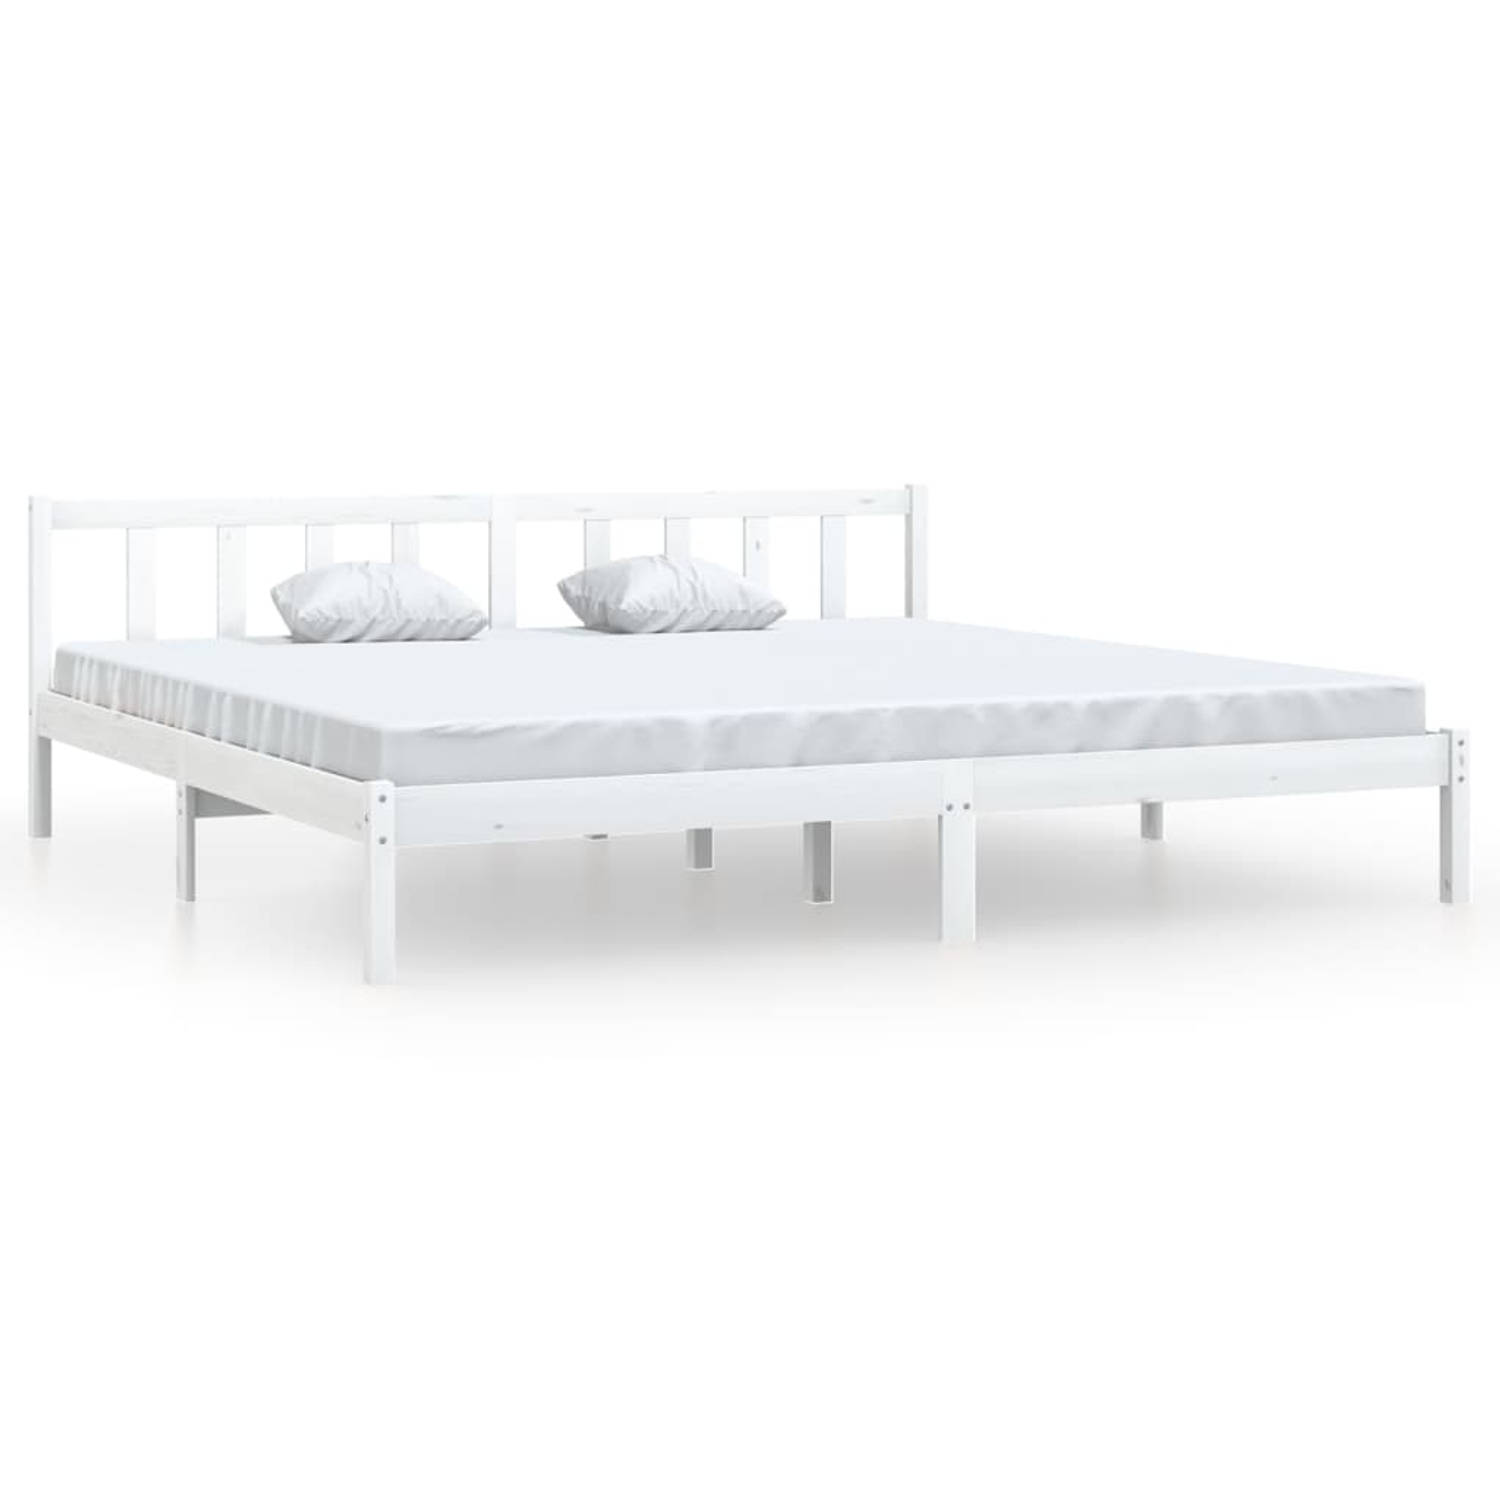 The Living Store Bedframe massief grenenhout wit 200x200 cm - Bedframe - Bedframe - Bed Frame - Bed Frames - Bed - Bedden - 1-persoonsbed - 1-persoonsbedden - Eenpersoons Bed